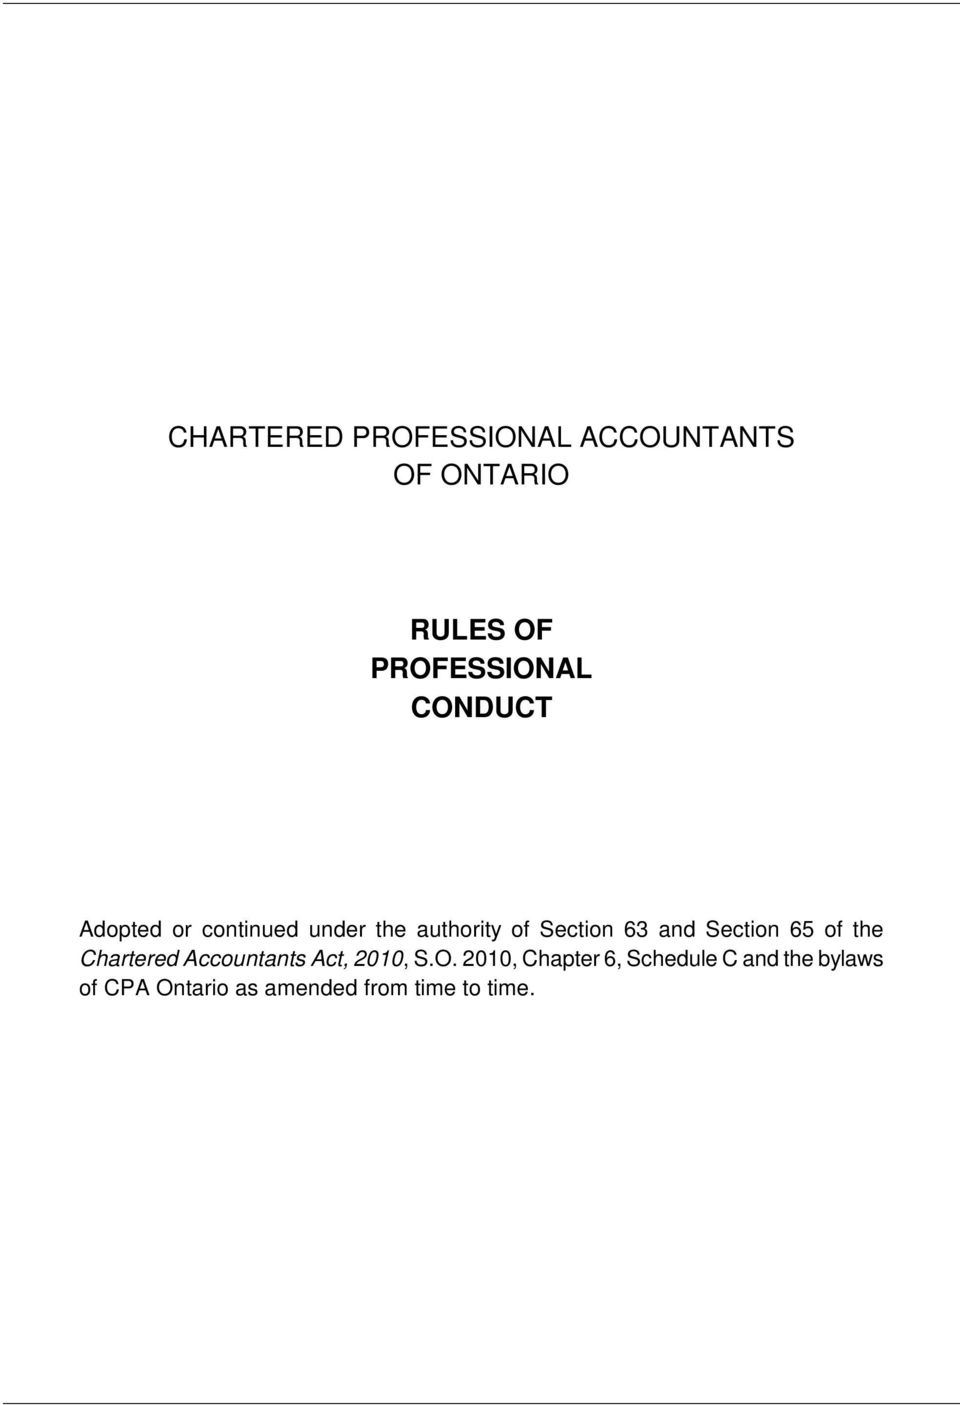 Section 65 of the Chartered Accountants Act, 2010, S.O.